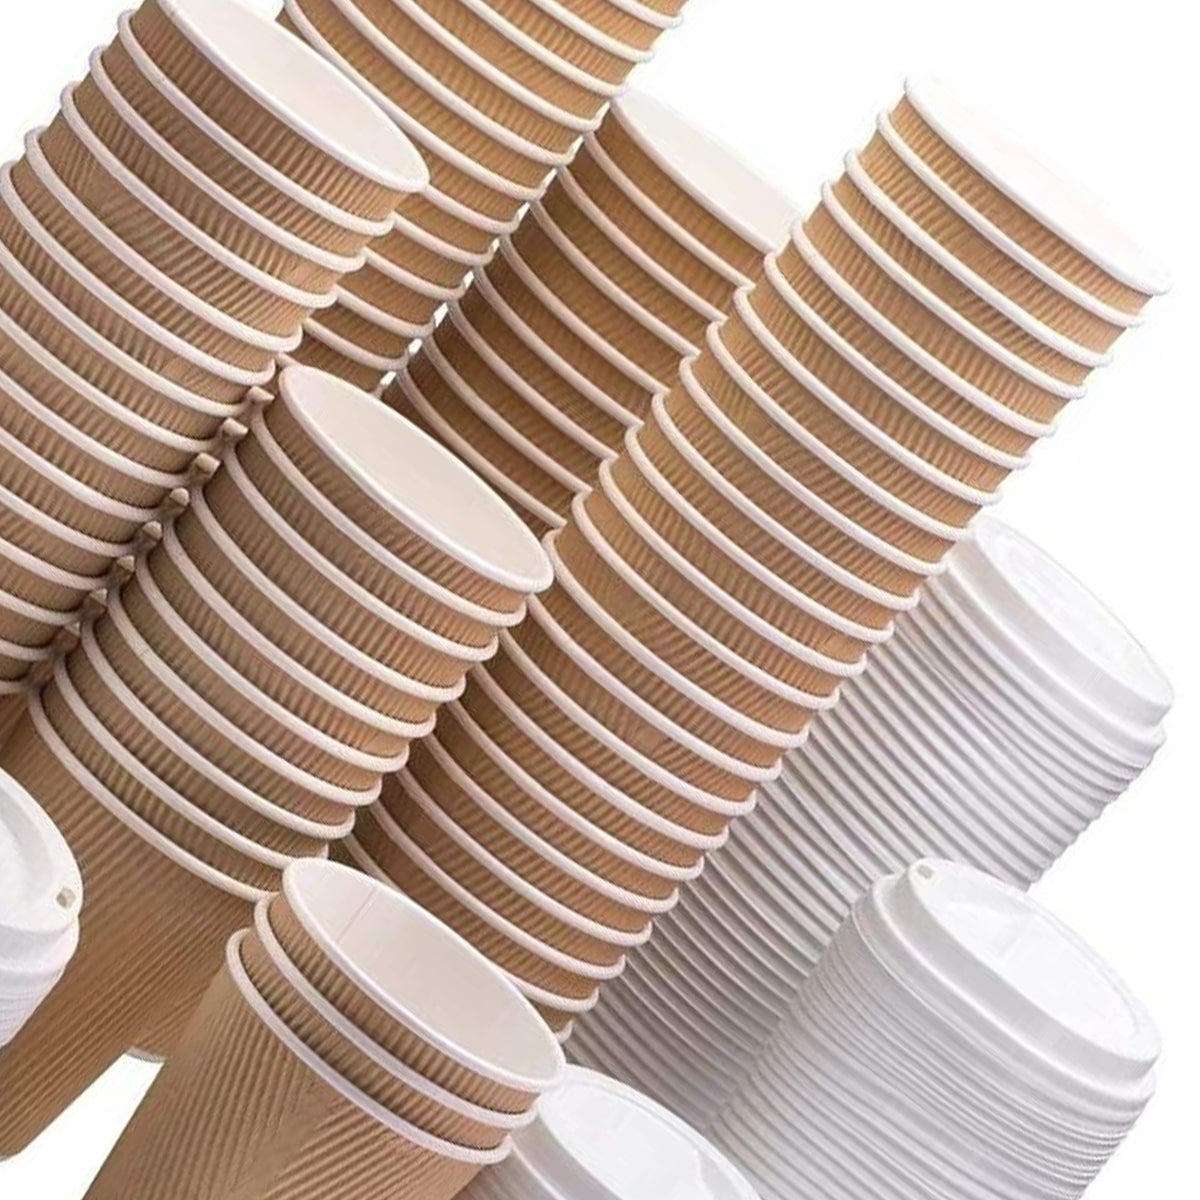 Disposable Cups With Lid 12 Oz - 500 Pcs